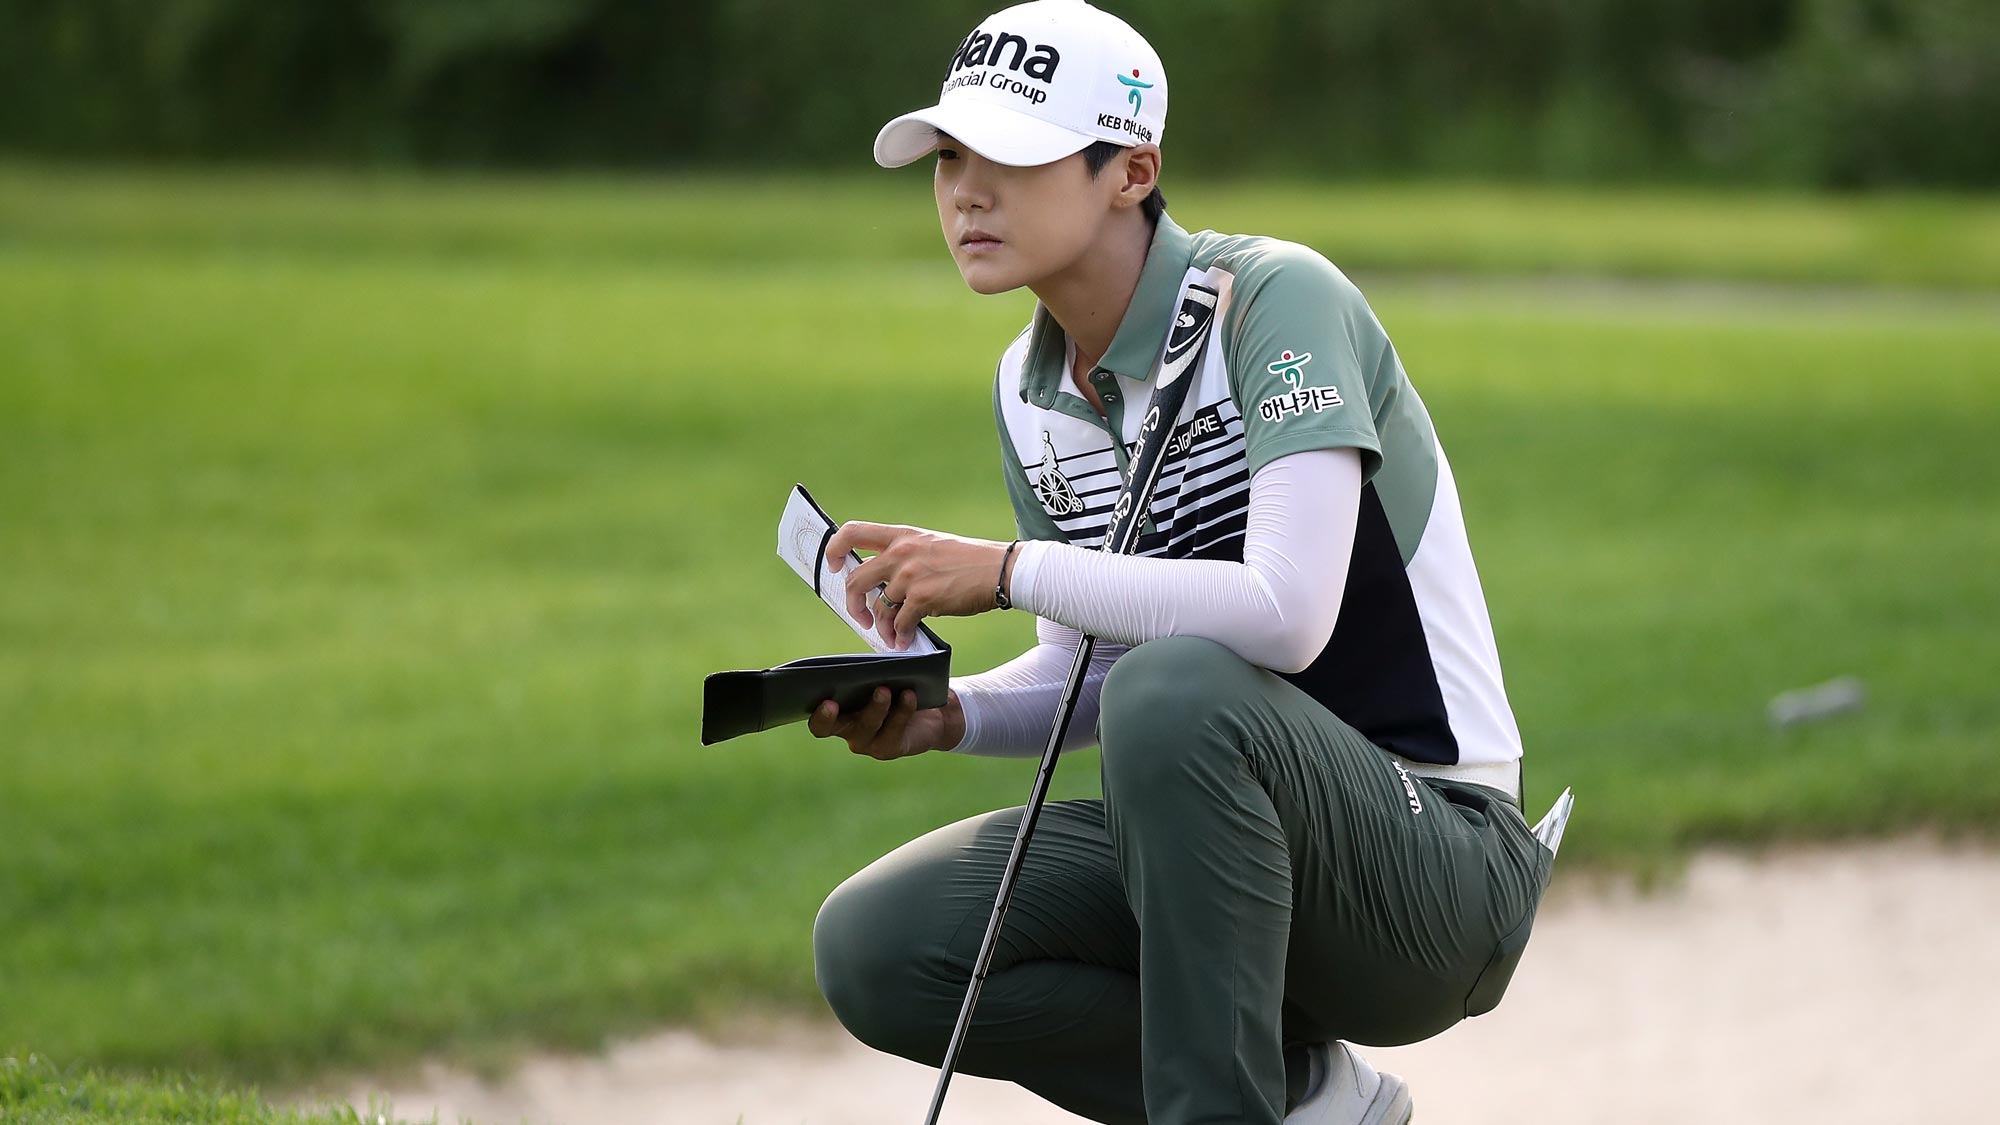 Sung Hyun Park of Korea reads a putt on the 14th green during the first round of the 2018 KPMG Women's PGA Championship